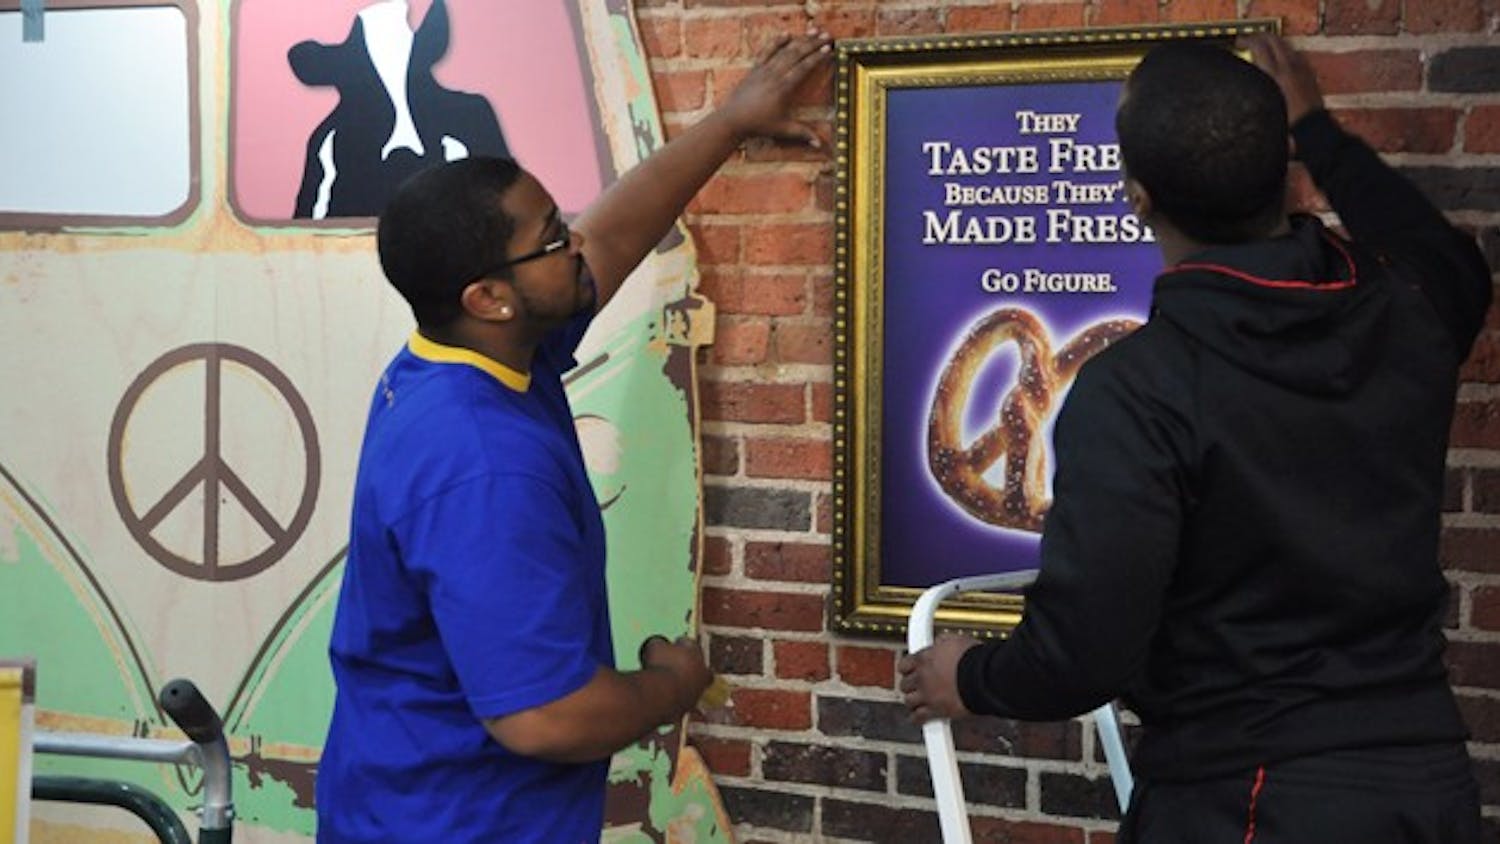 AUIYB - Owners Antonio McBroom (left) and Eric Taylor prepare for Ben and Jerry's Grand Re-Opening as well as Auntie Anne's addition Wednesday, January 11.